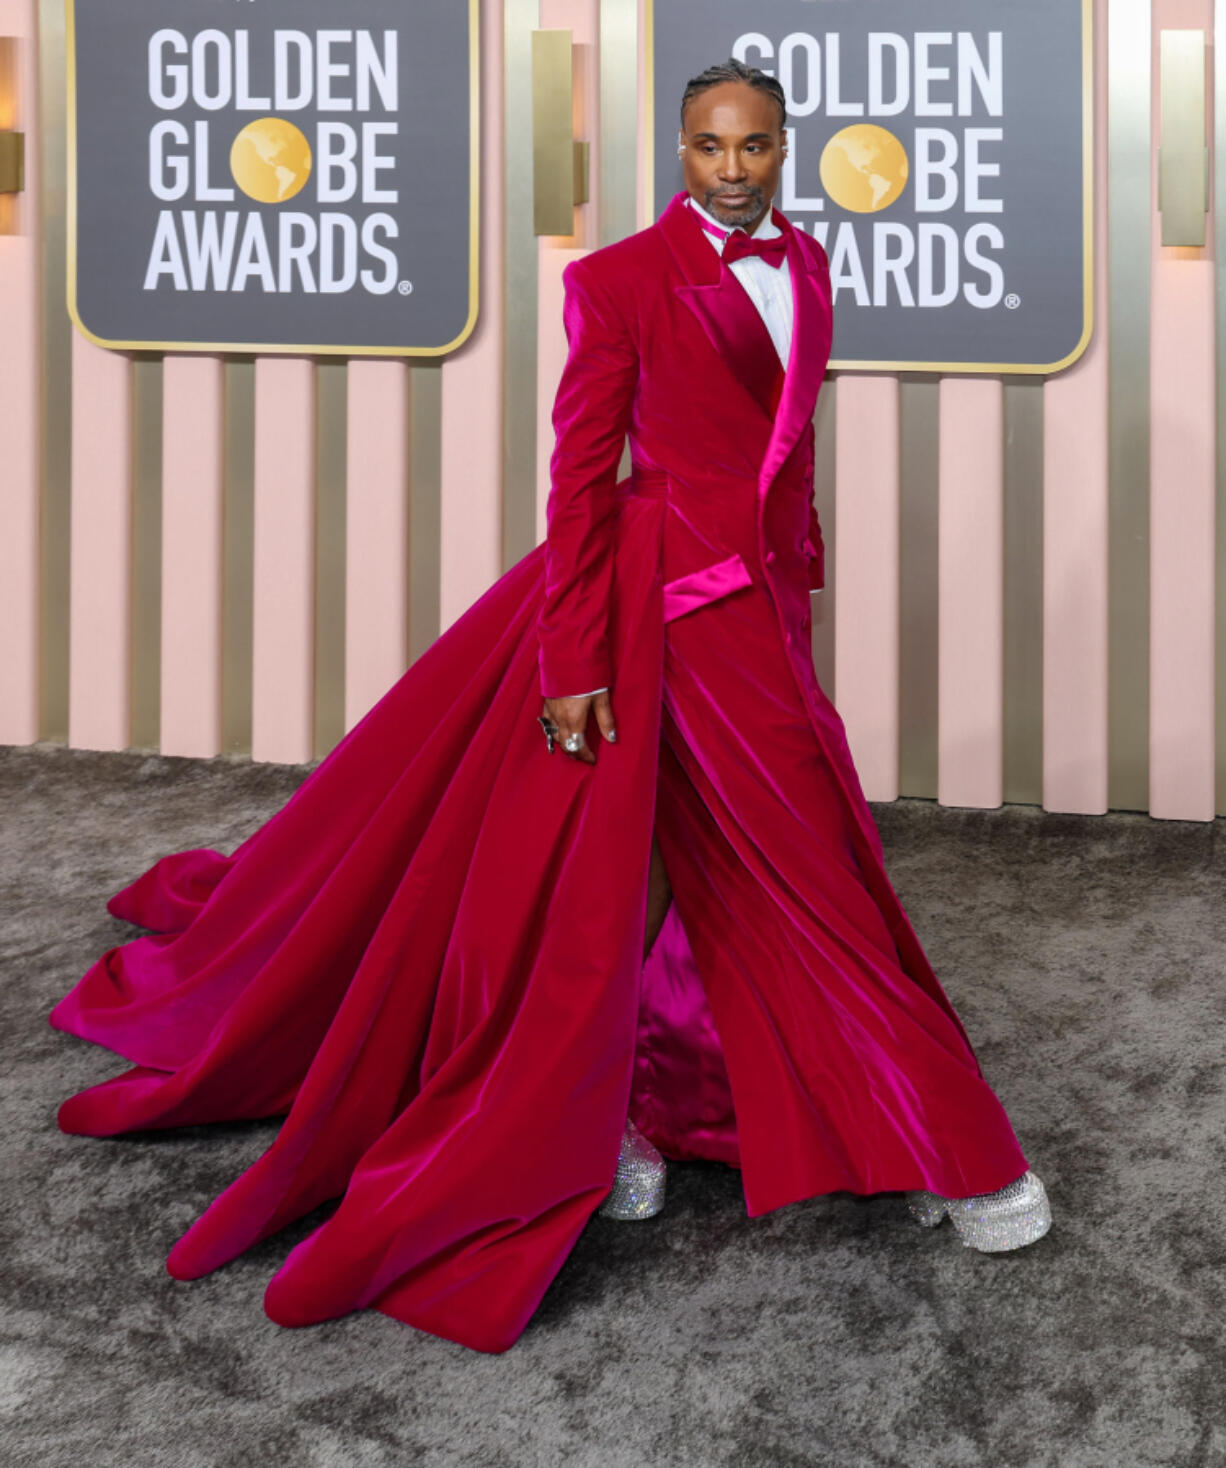 Billy Porter arrives at the 80th Golden Globe Awards at the Beverly Hilton Hotel on Jan. 10, 2023, in Los Angeles.